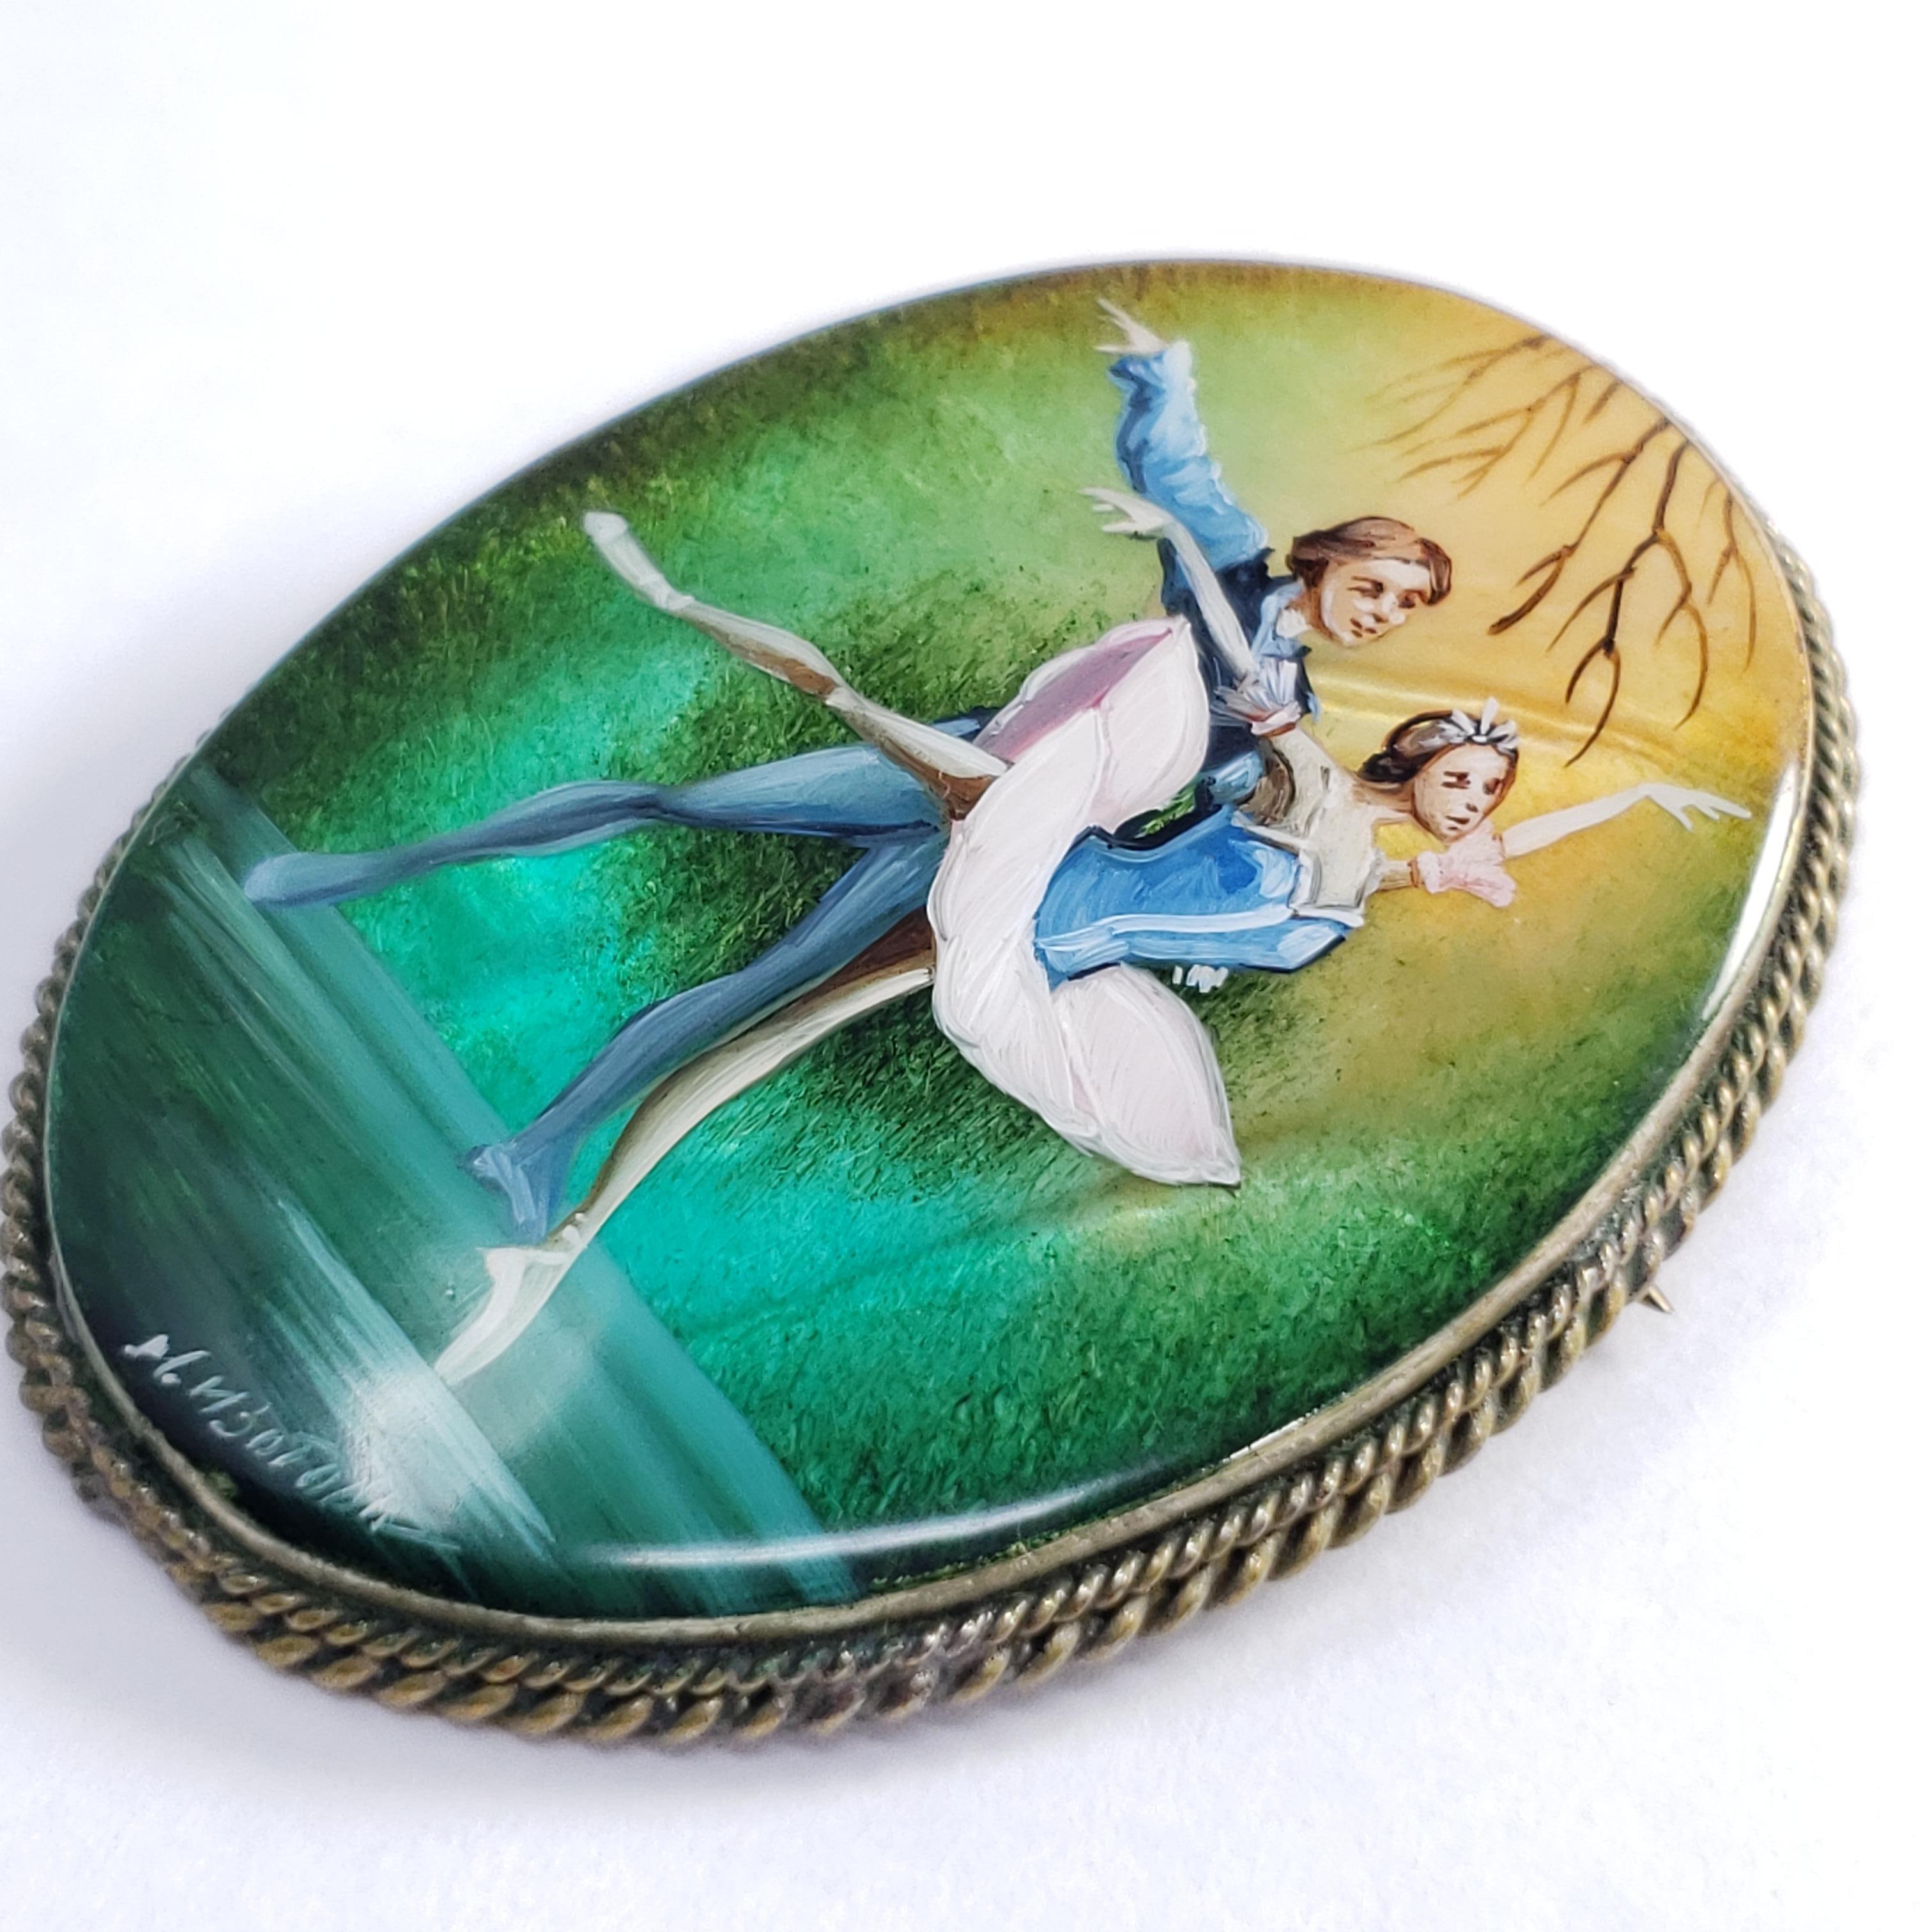 An exquisite Russian Fedoskino brooch set in a beautiful German silver bezel. Features pair of ballet dancers on a green and yellow background, hand-painted on a mother-of-pearl stone with a layer of lacquer.

Signed by artist - M Izotova (М